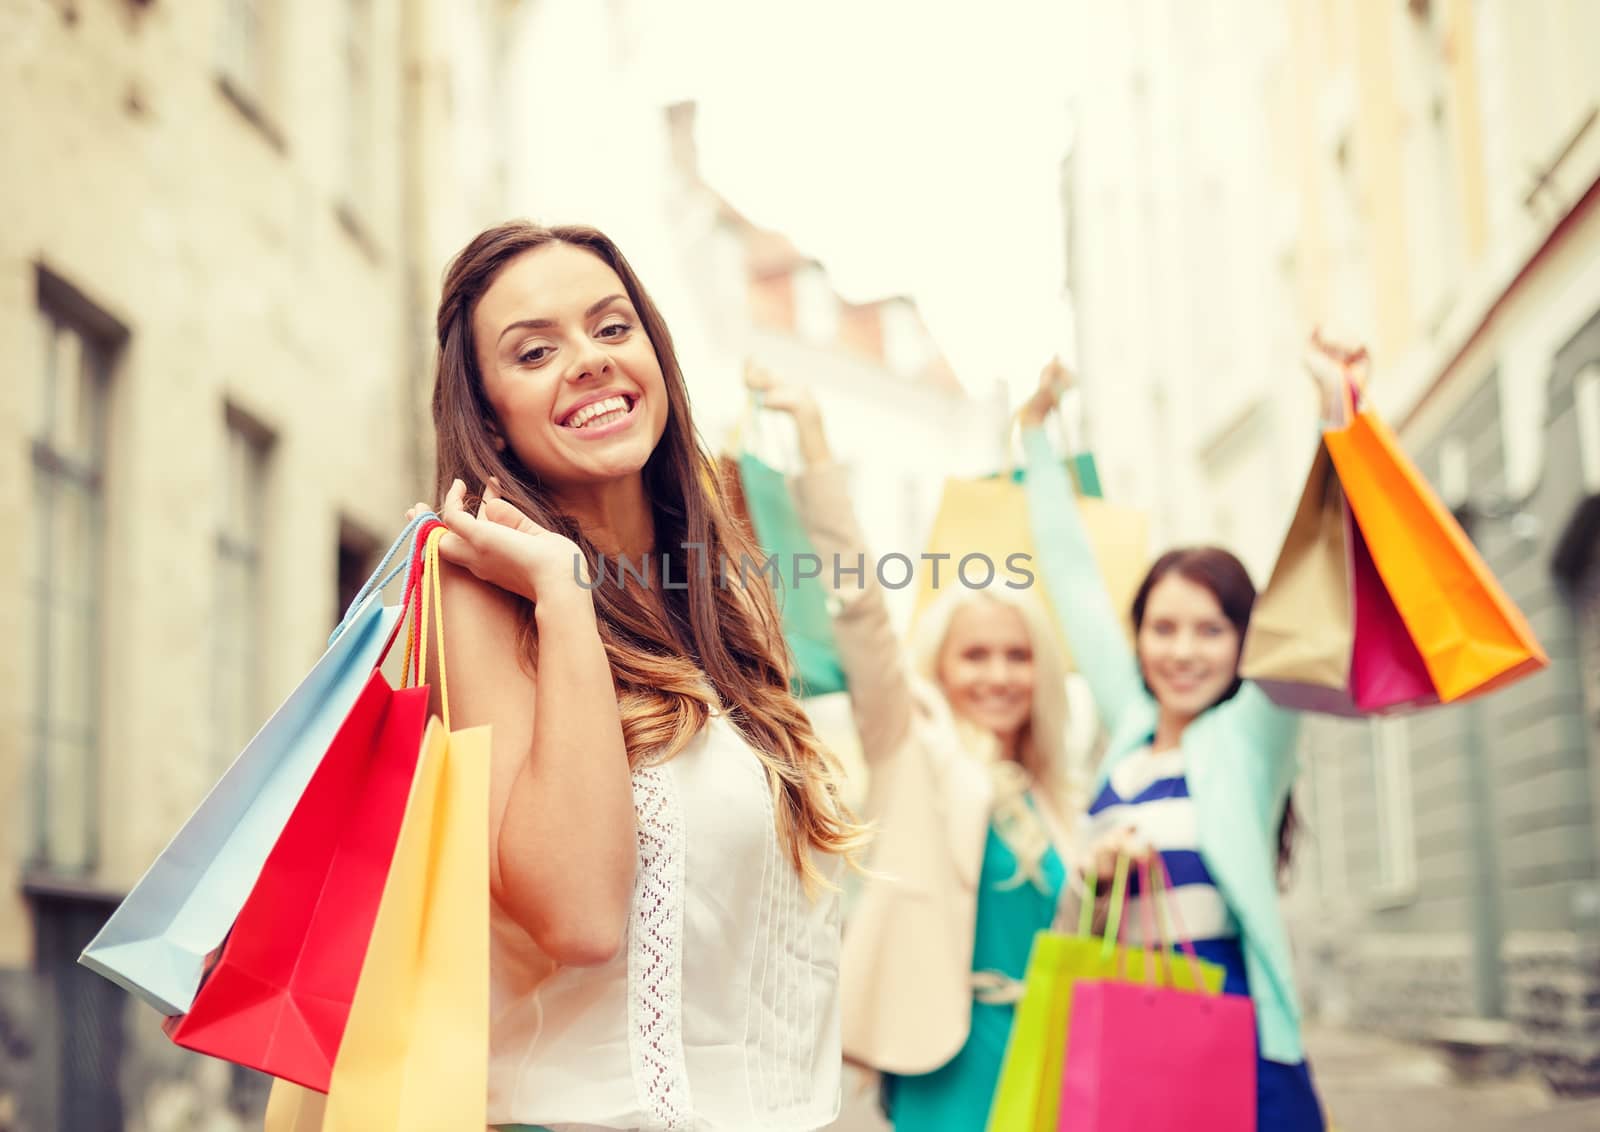 sale, shopping, tourism and happy people concept - beautiful woman with shopping bags in the ctiy